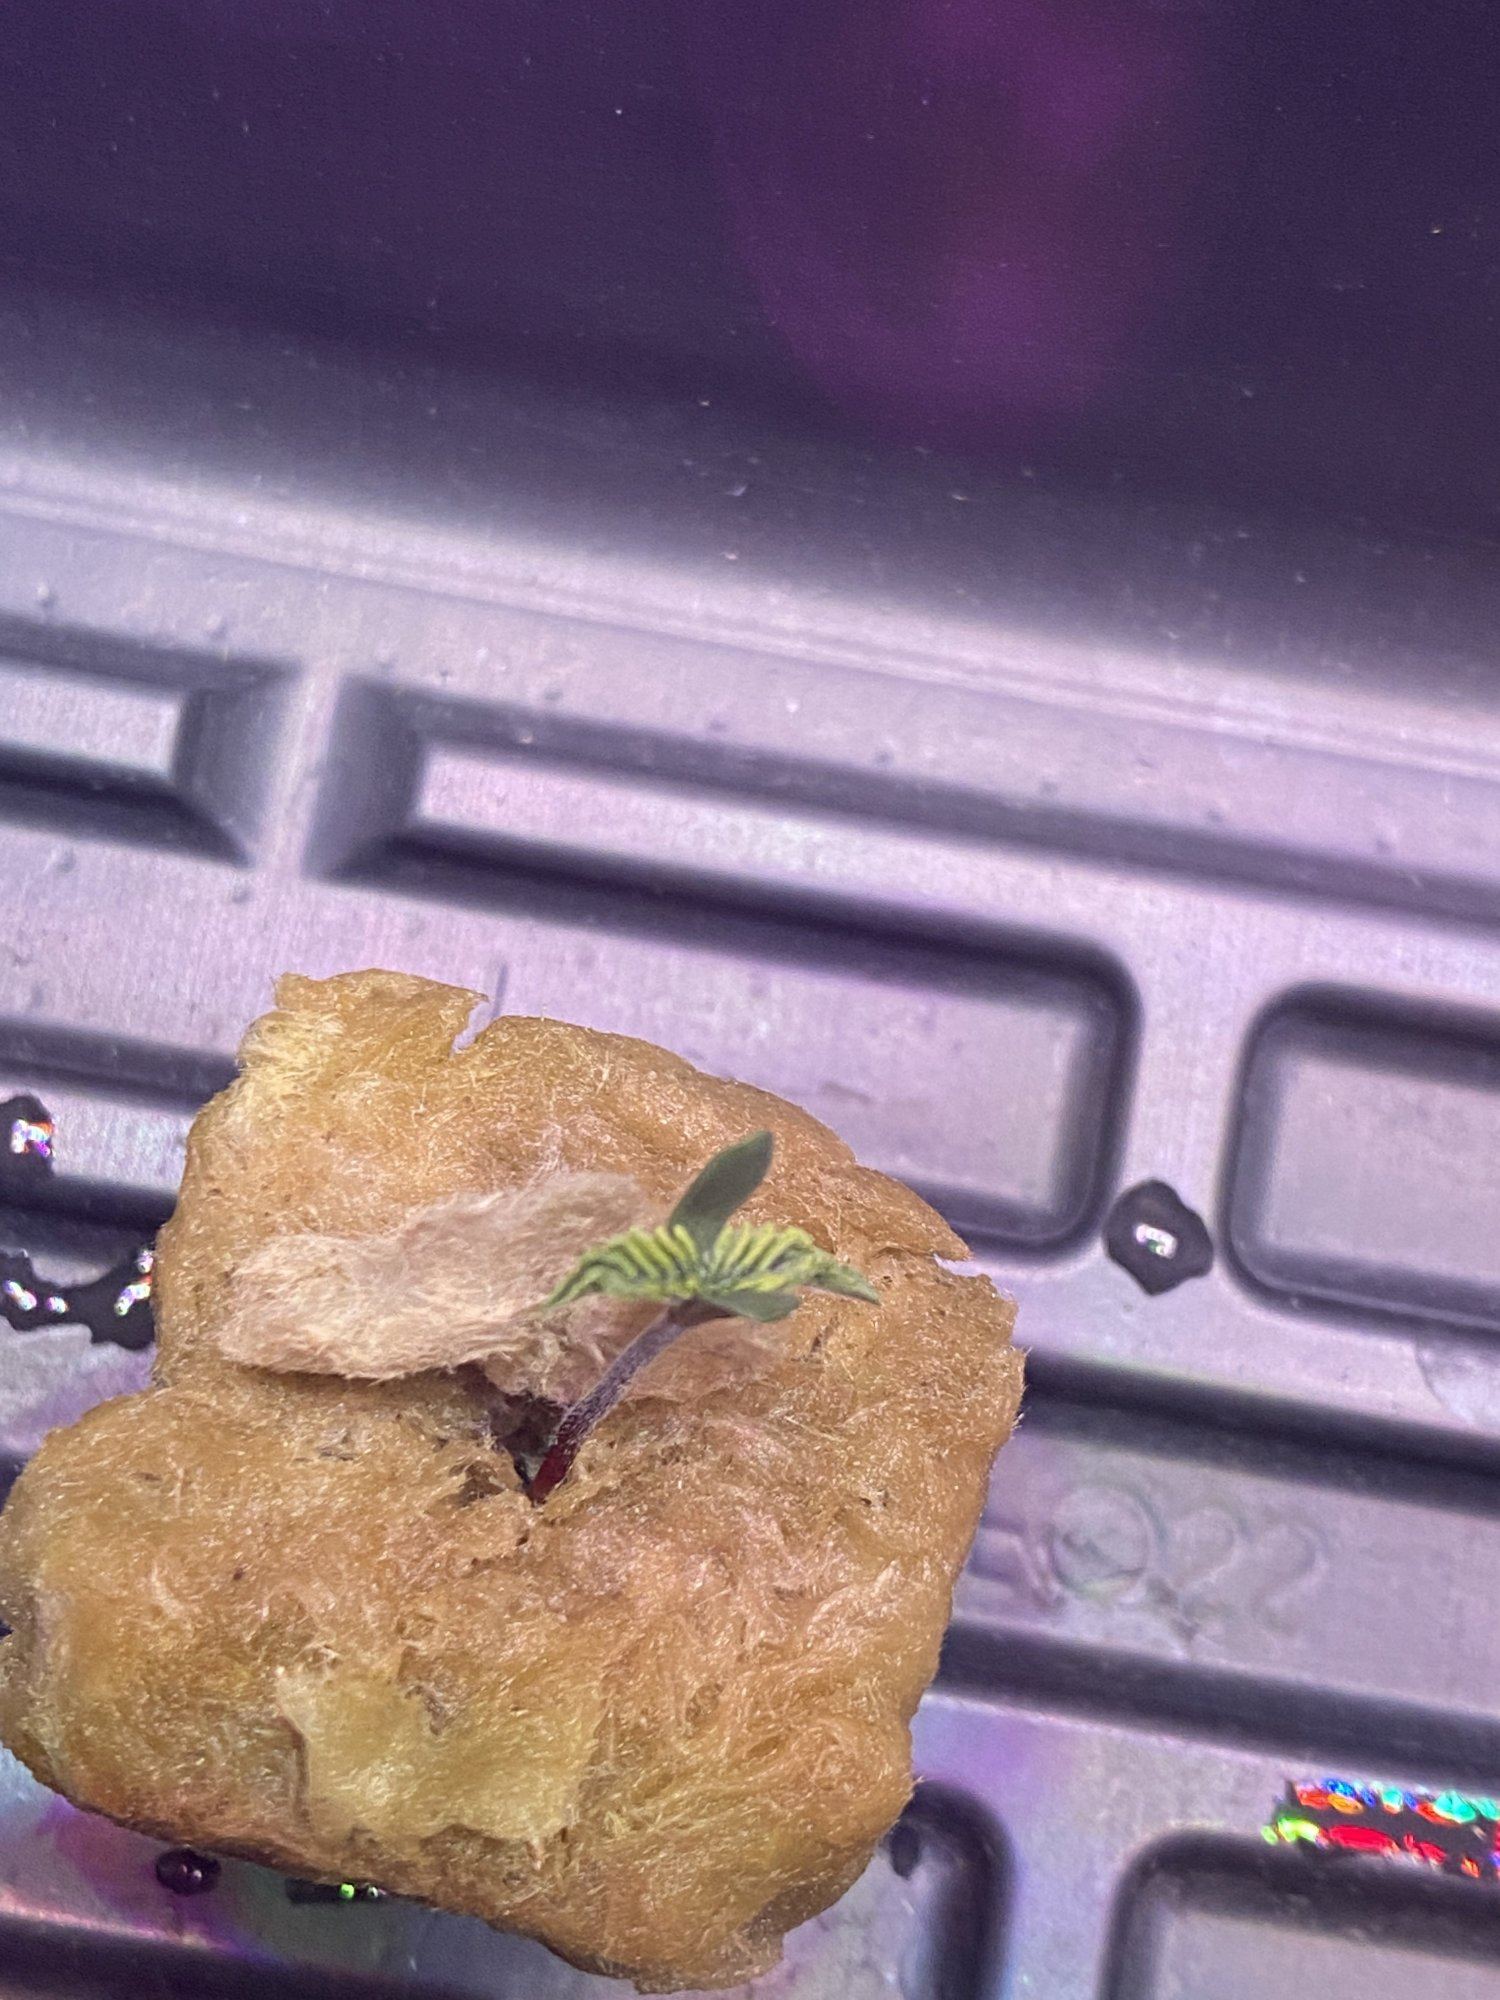 Please help seedlings are 1 week old and are not doing great 2